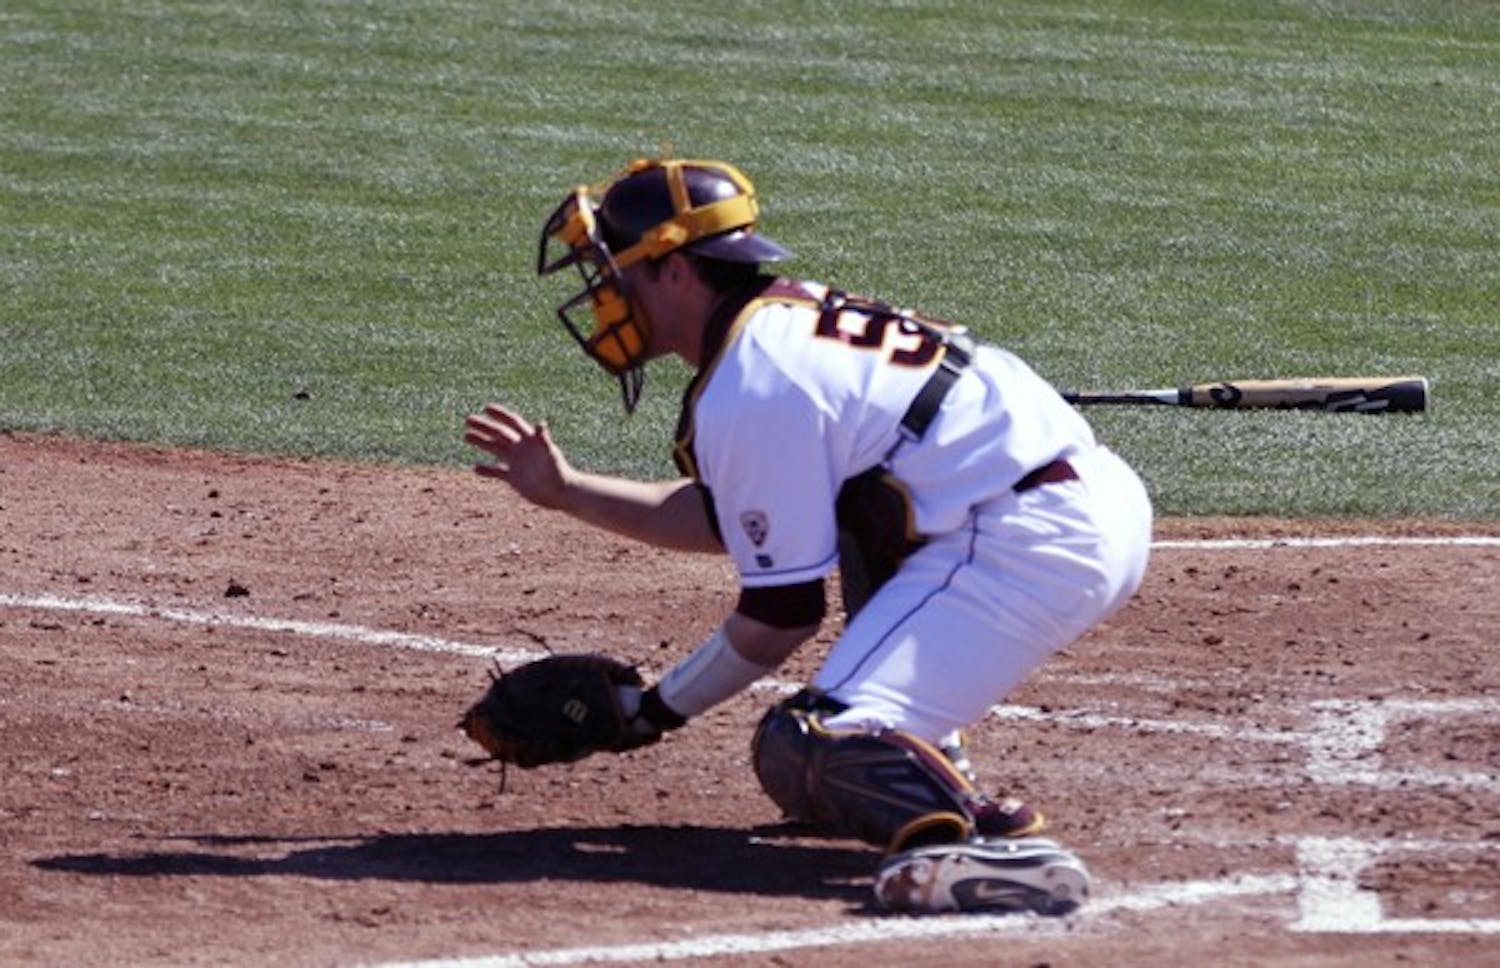 SUN DEVIL SWEEP: Senior outfielder/pitcher Kole Calhoun goes for a hit in last week's game against Northern Illinois. The Sun Devils played four games against Towson this week, sweeping them in each game. (Photo by Scott Stuk)